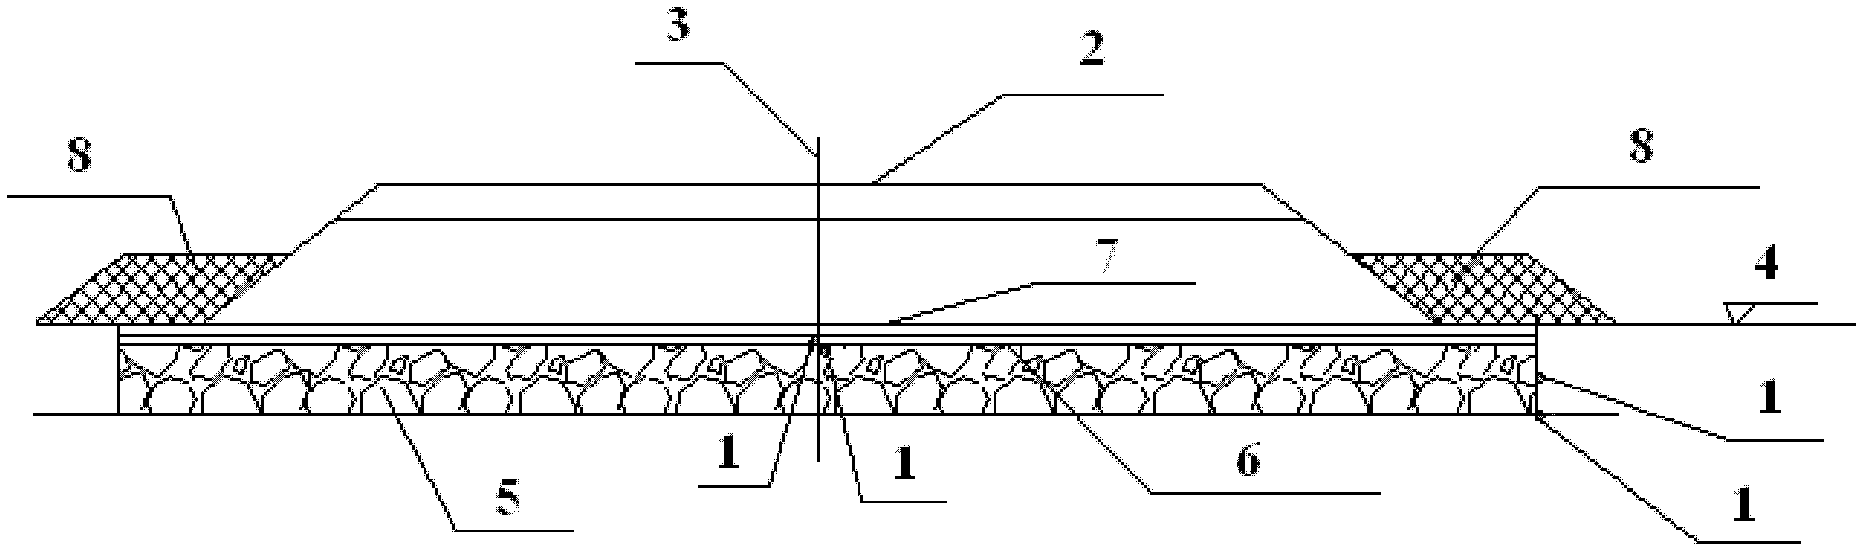 Insulation construction method for frozen-earth roadbed